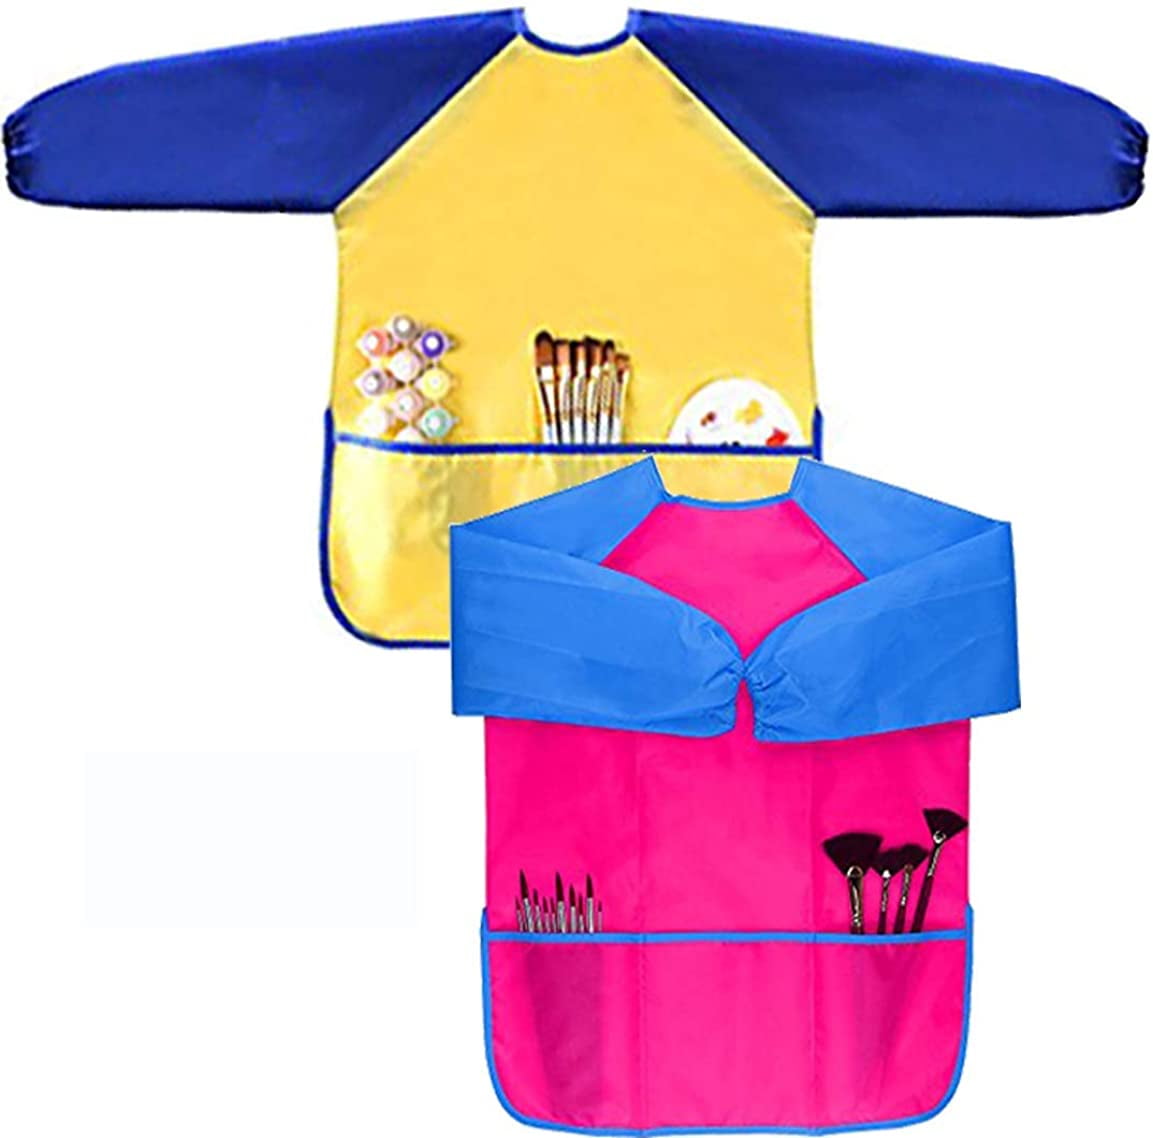 PASHOP Kids Art Smock Pack of 2 Waterproof Artist Painting Aprons Children Art Smocks Long Sleeve with 3 Pockets for Age 2-7 Years 